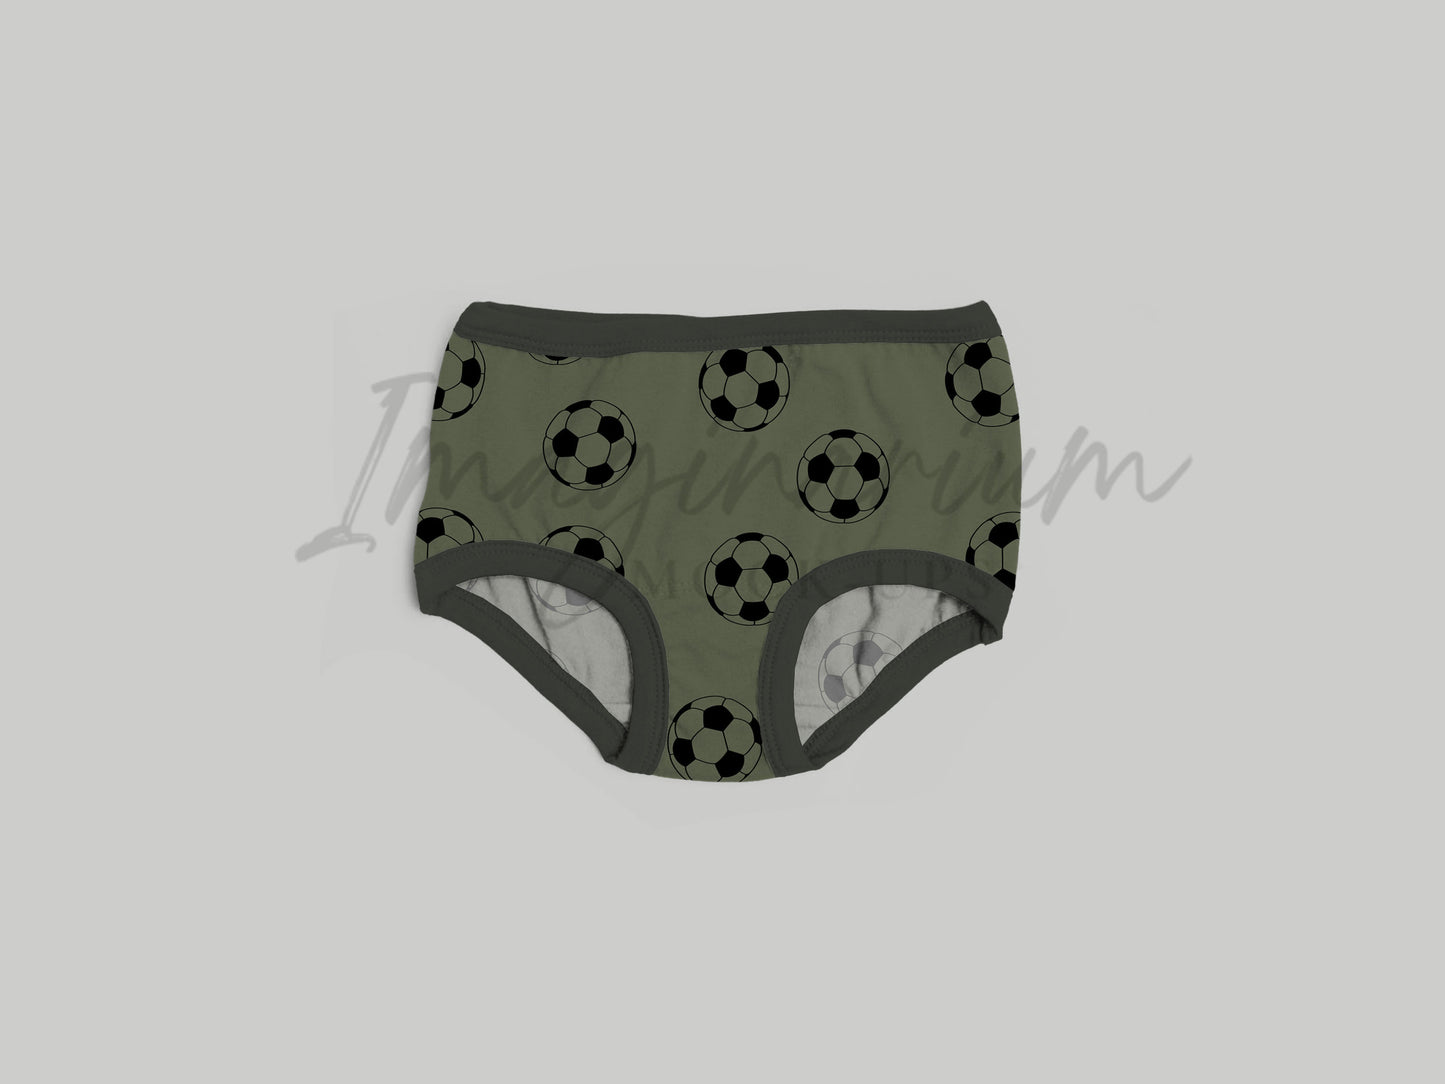 Gus + Steel Unders  Underwear Mock Up, Realistic Clothing Mockup for Photoshop and Procreate